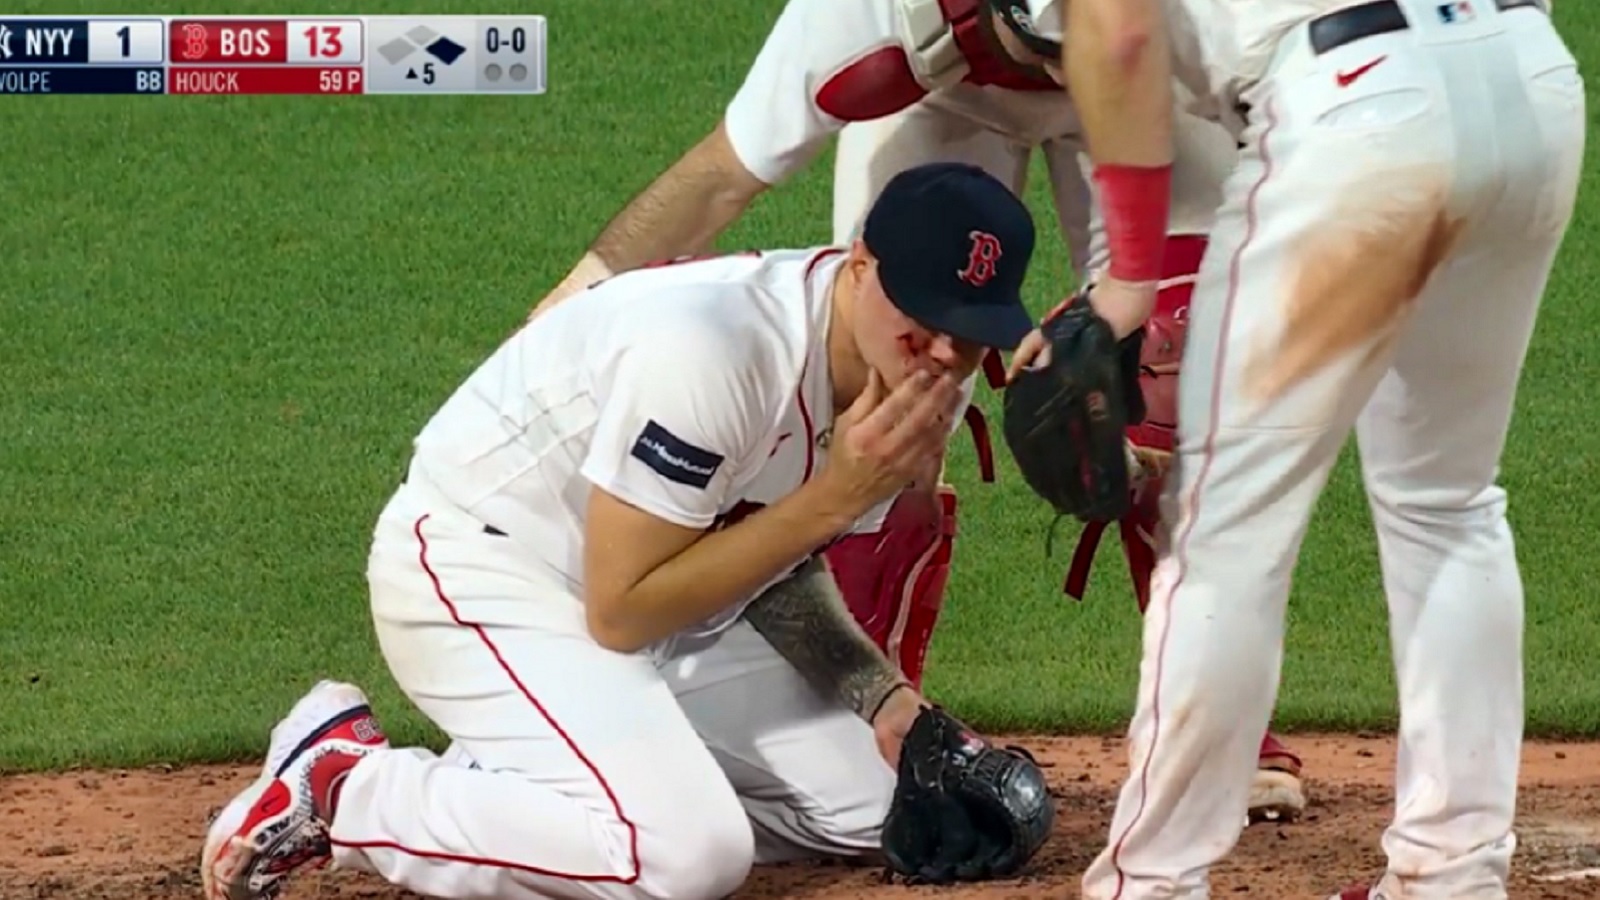 Red Sox pitcher avoids serious injury despite being hit by ball in face